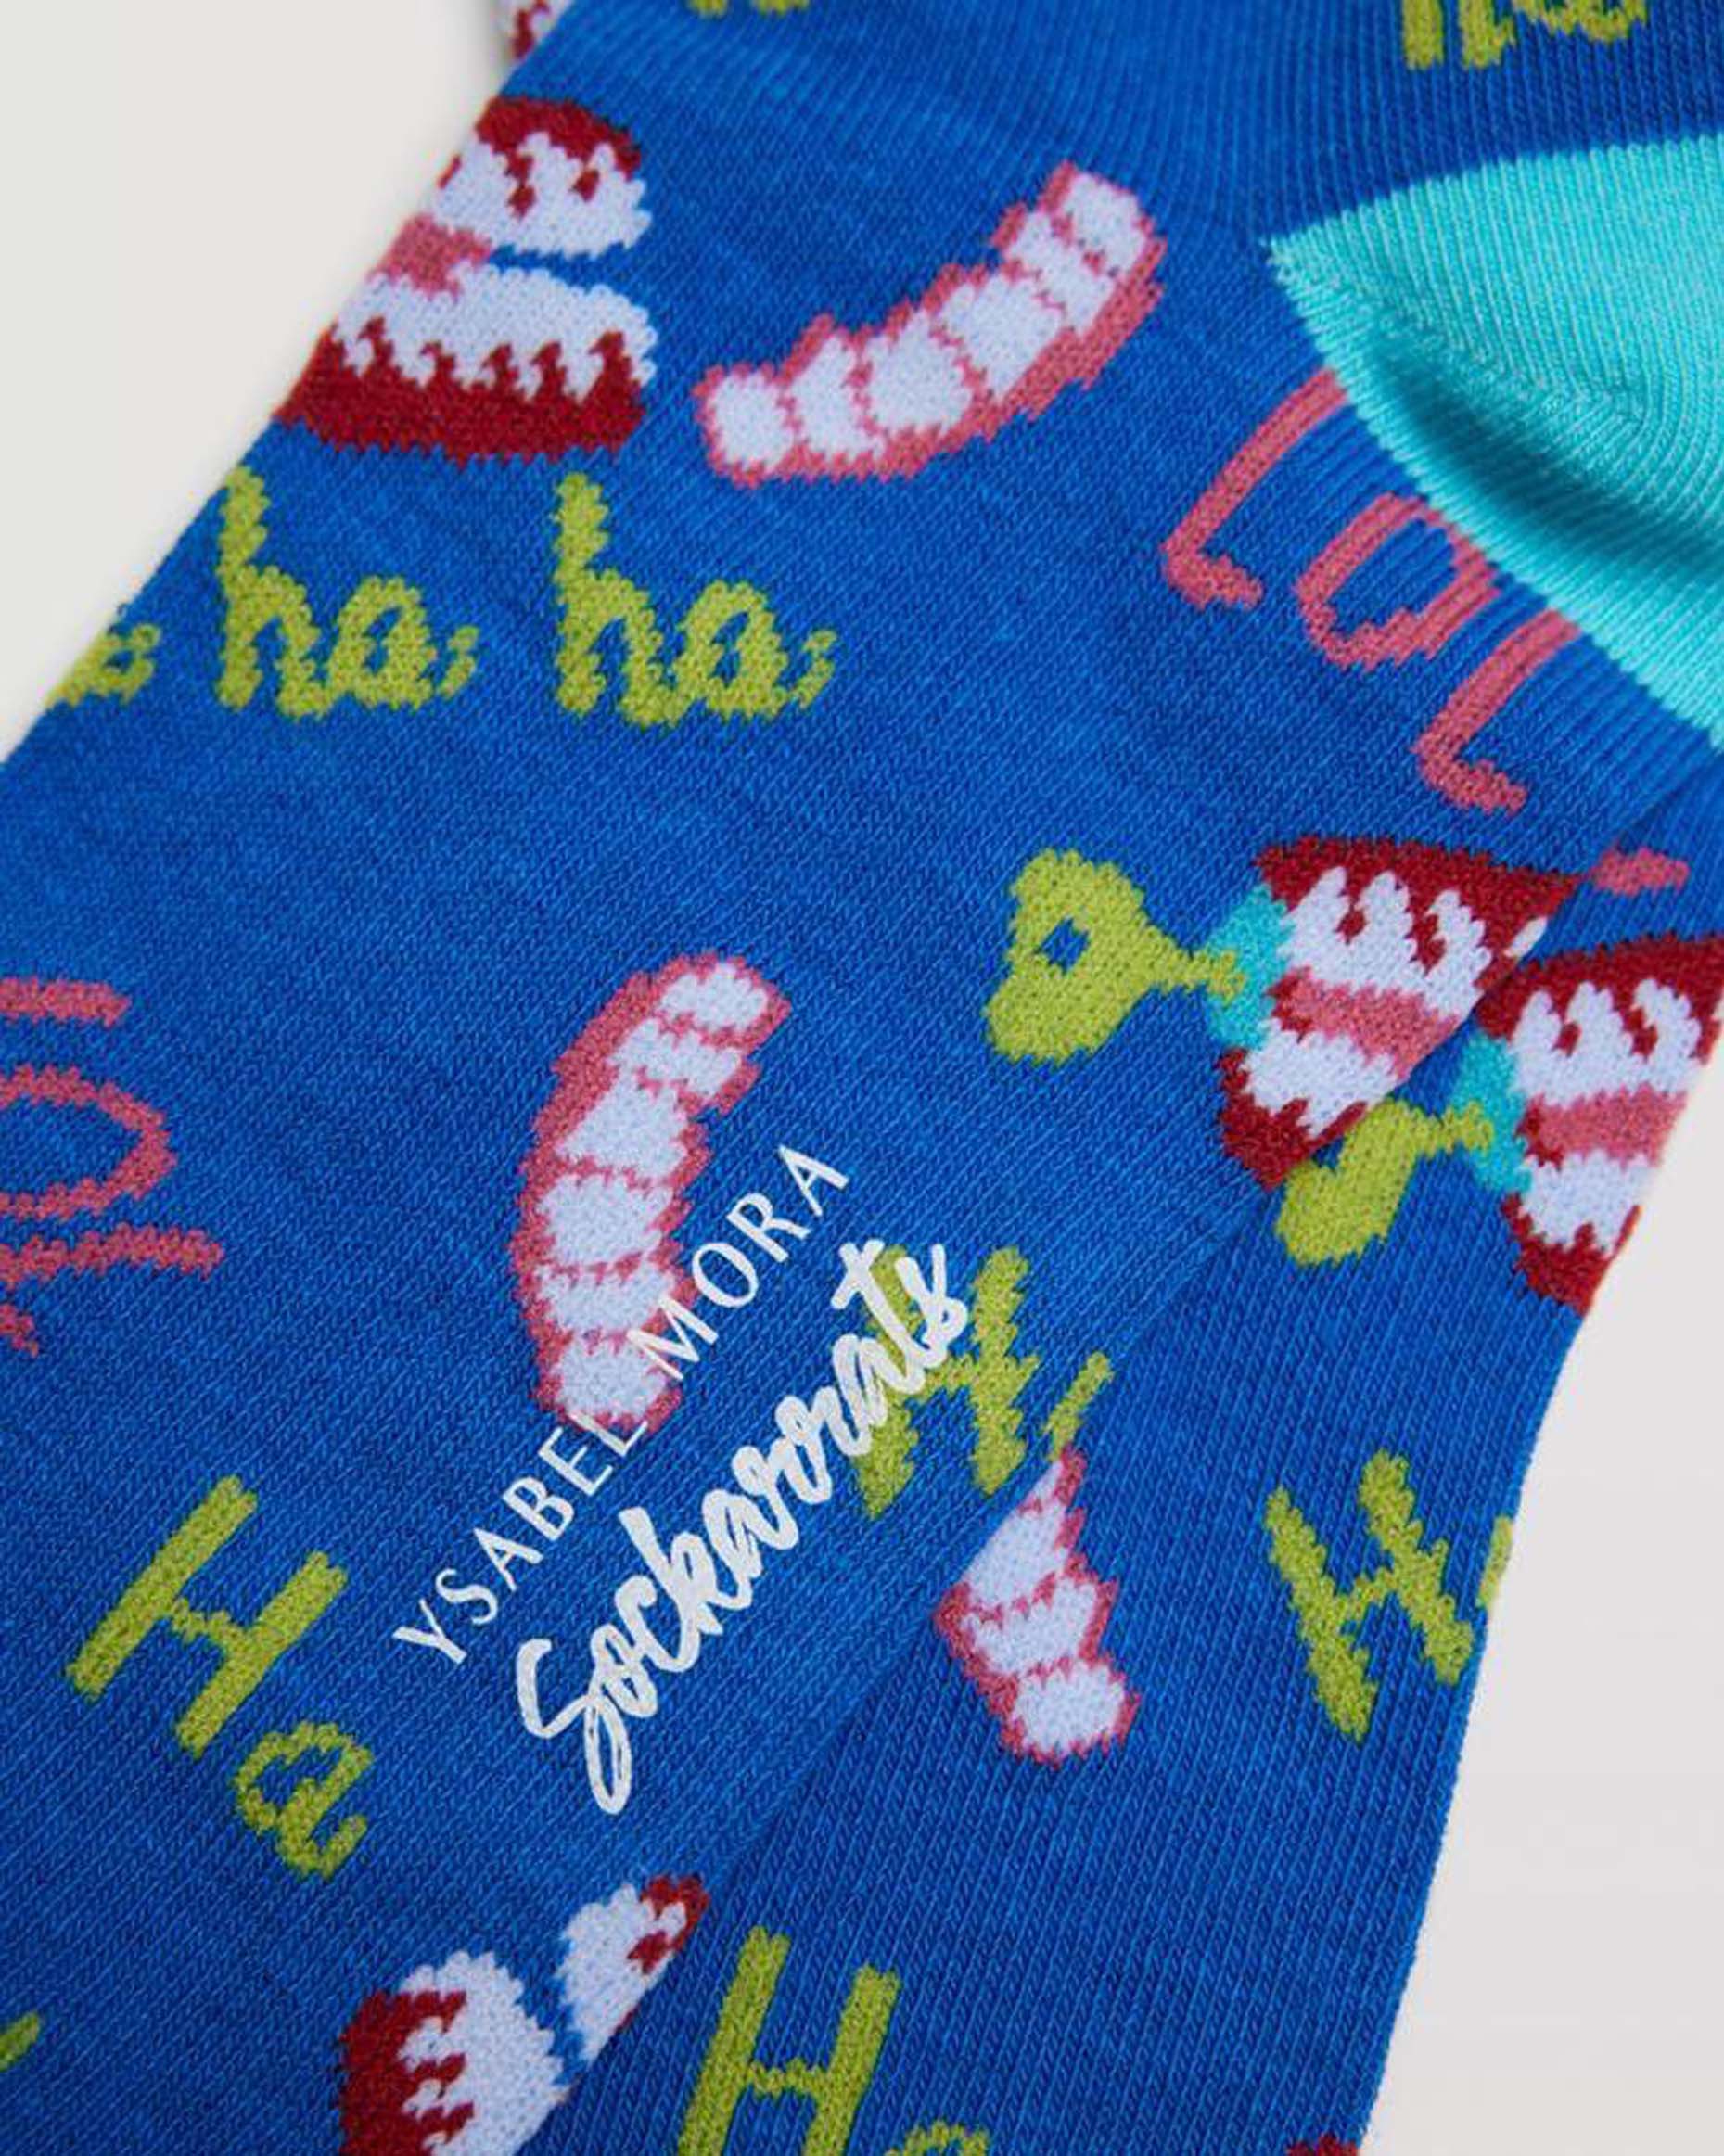 Ysabel Mora 12905 Joke Socks - Blue cotton socks with an all over pattern of wind up joke teeth, the text "LOL" and "ha ha ha" in red, pink, white and lime green, turquoise toe.